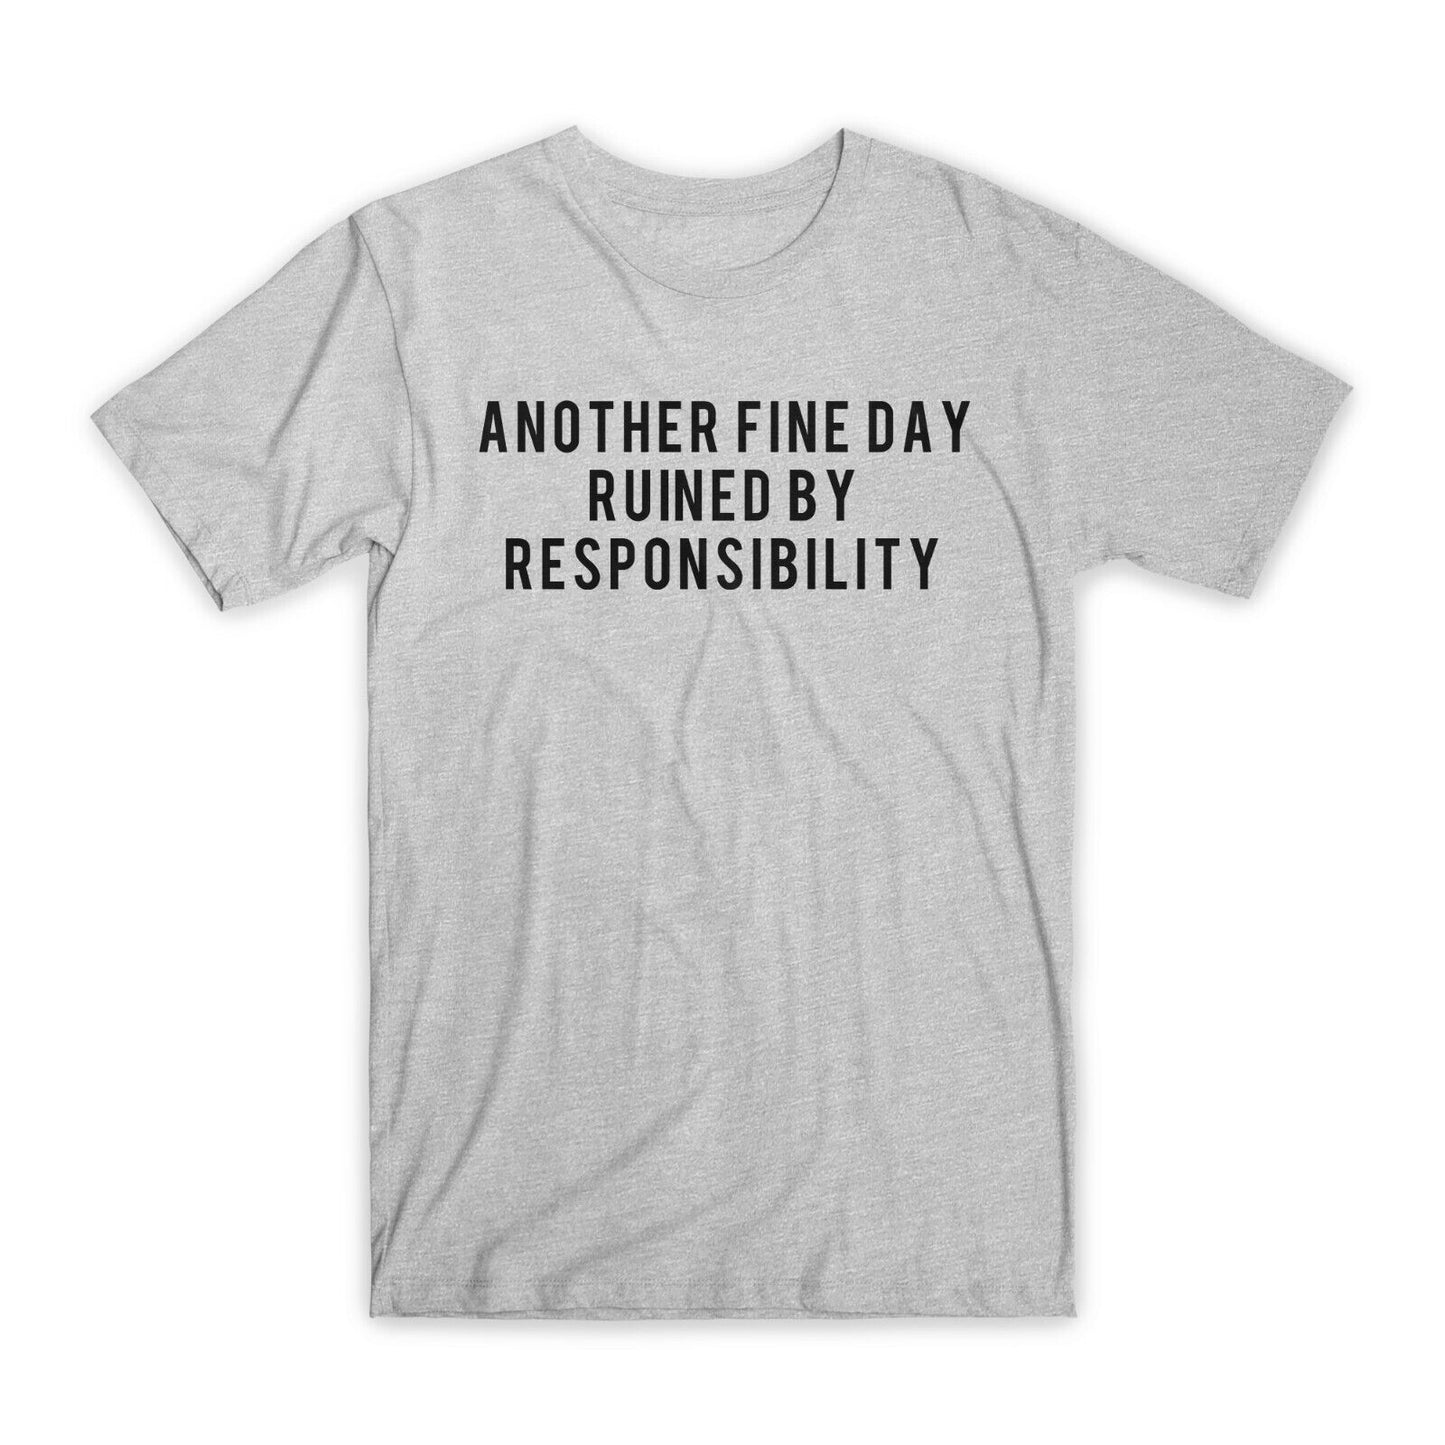 Another Fine Day Ruined By Responsibility T-Shirt Premium Cotton Funny Tees NEW